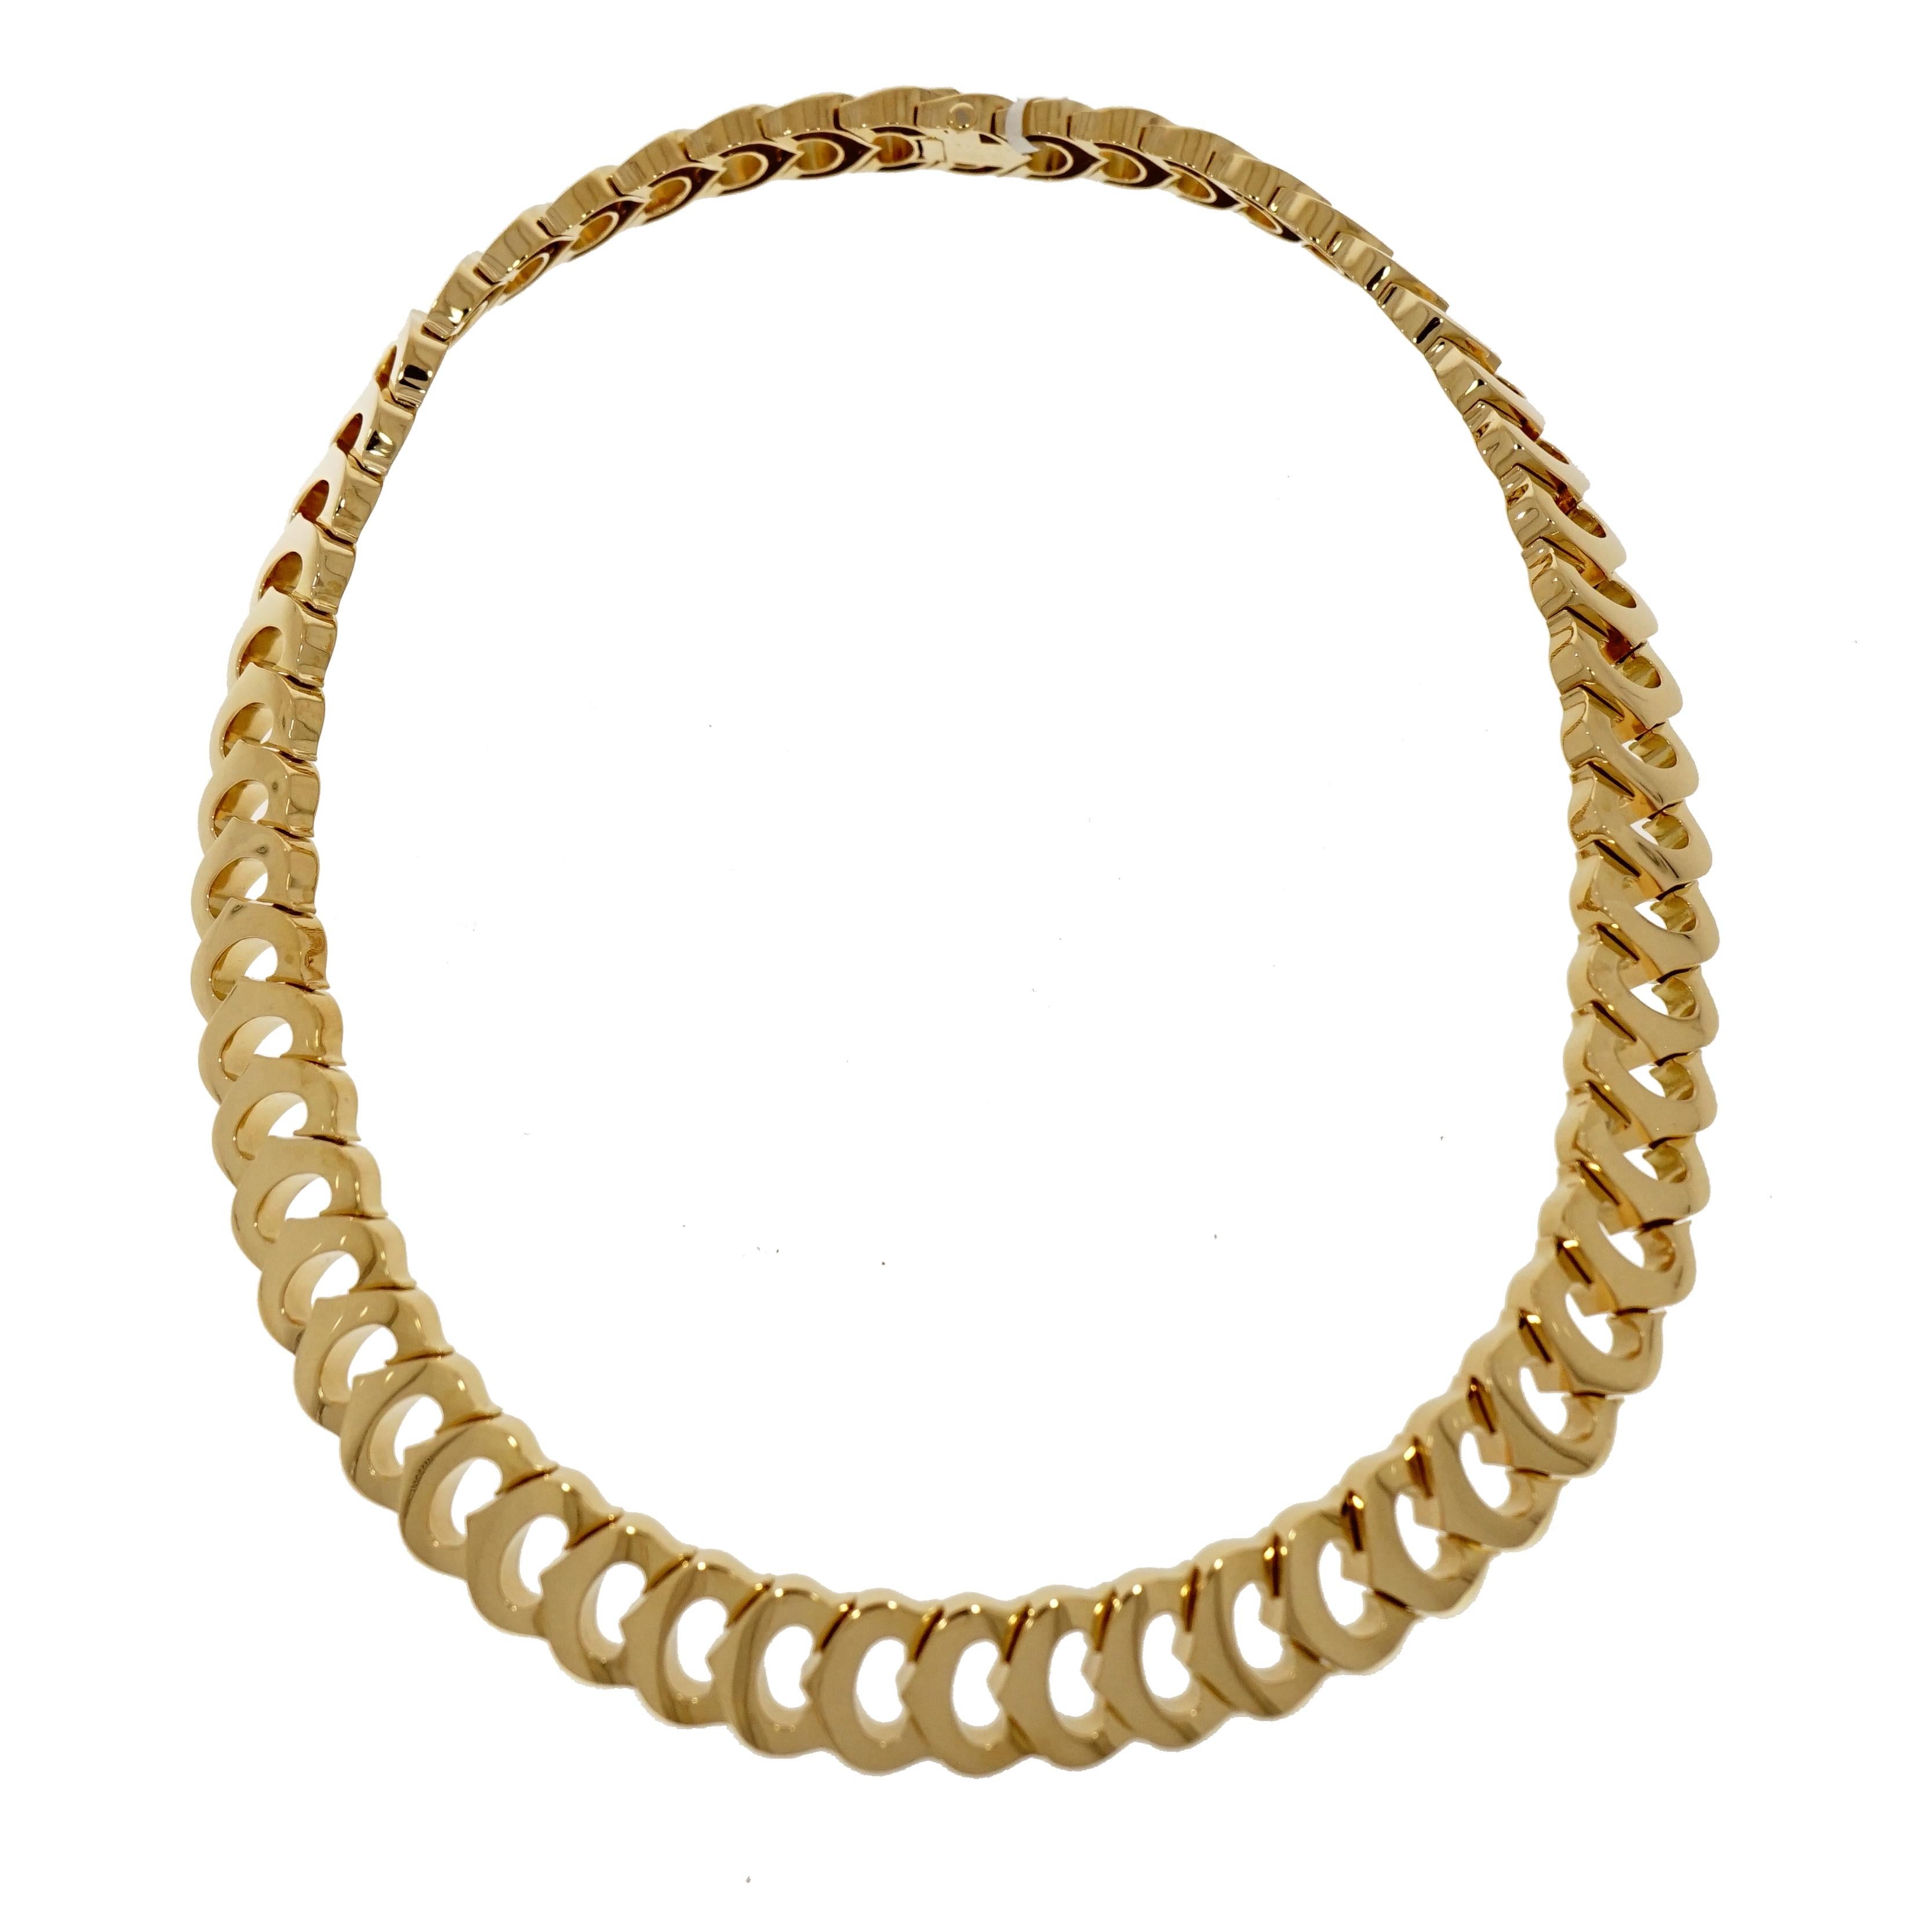 This is an authentic wide collar necklace by Cartier from 